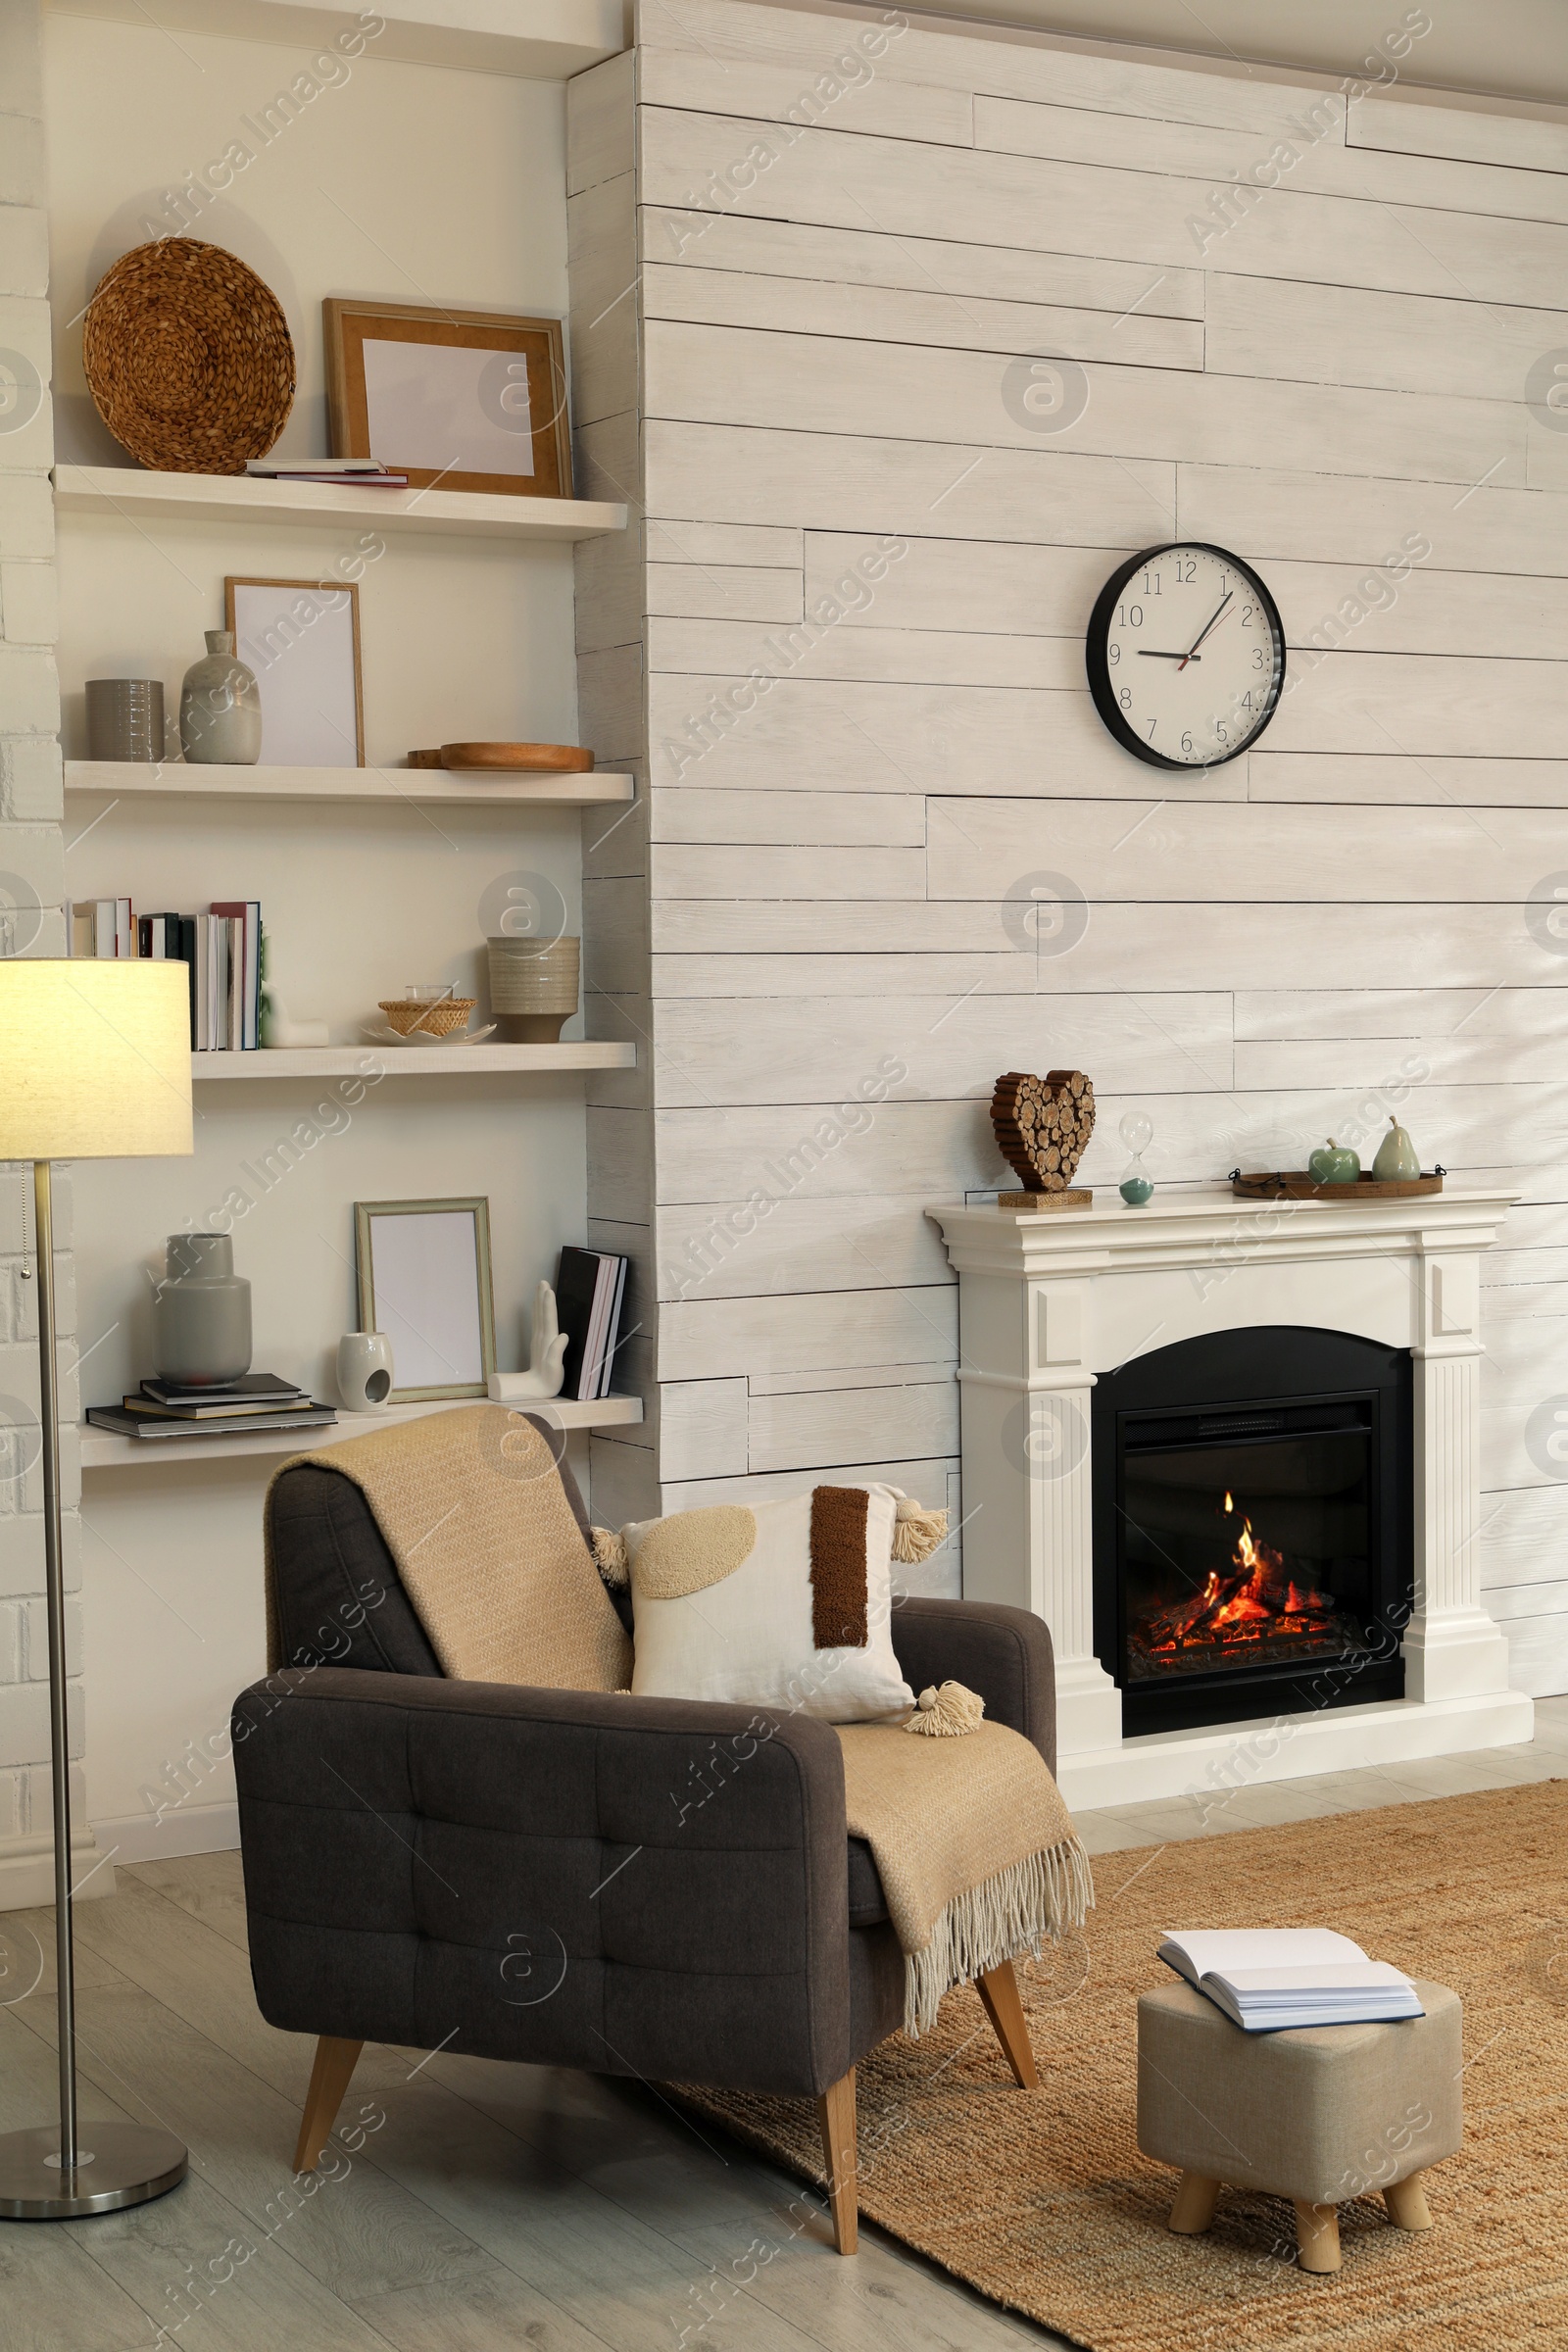 Photo of Stylish living room interior with comfortable armchair and decorative fireplace